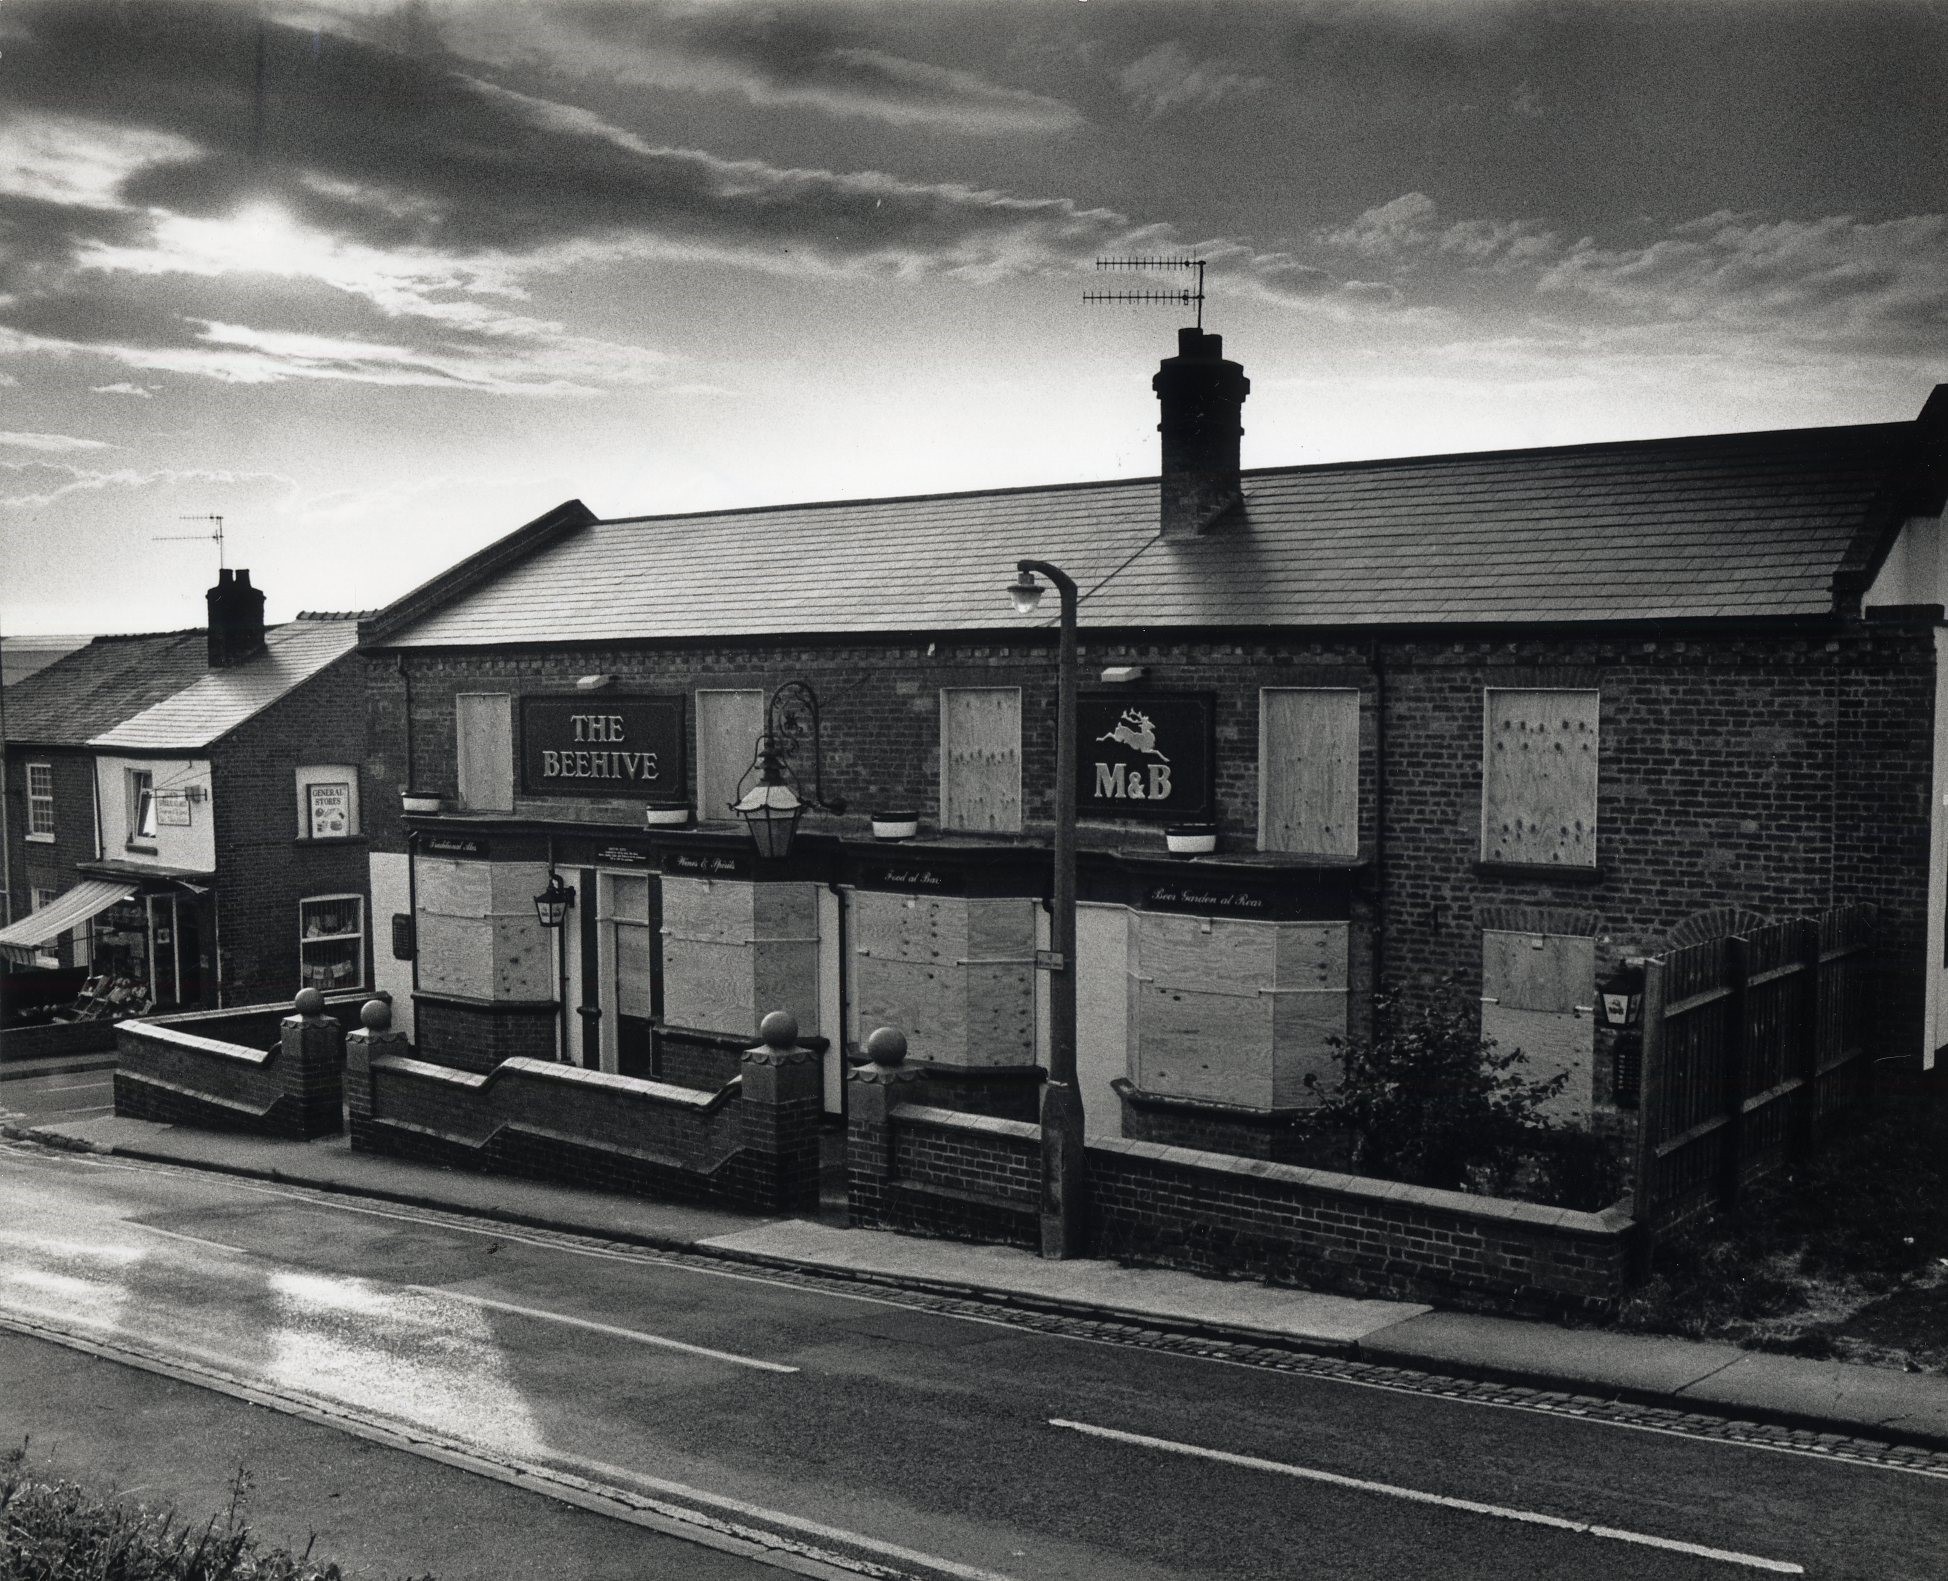 The Beehive Inn on Tallow Hill, which closed in 2000 and was demolished. Nearby a mass grave was dug in the 1830s to bury Worcester’s victims of cholera